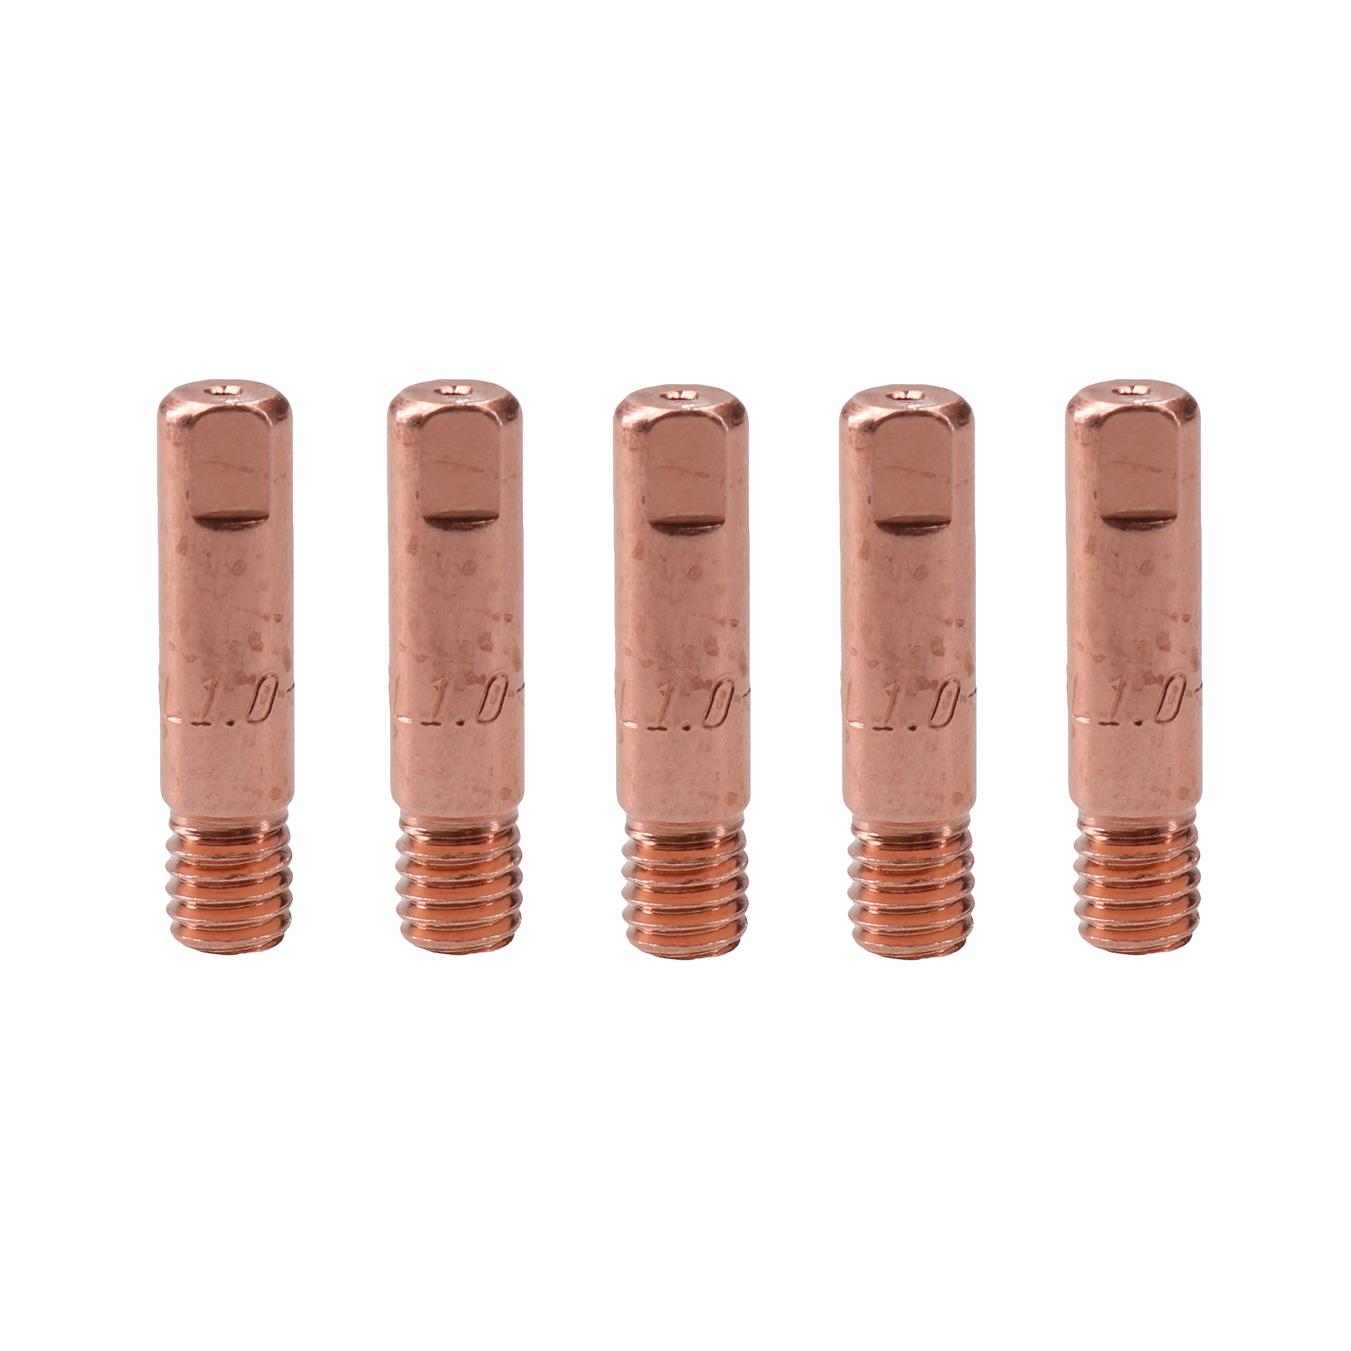 Mig Welding Welder Round Contact Tips for MB15 Euro Torches